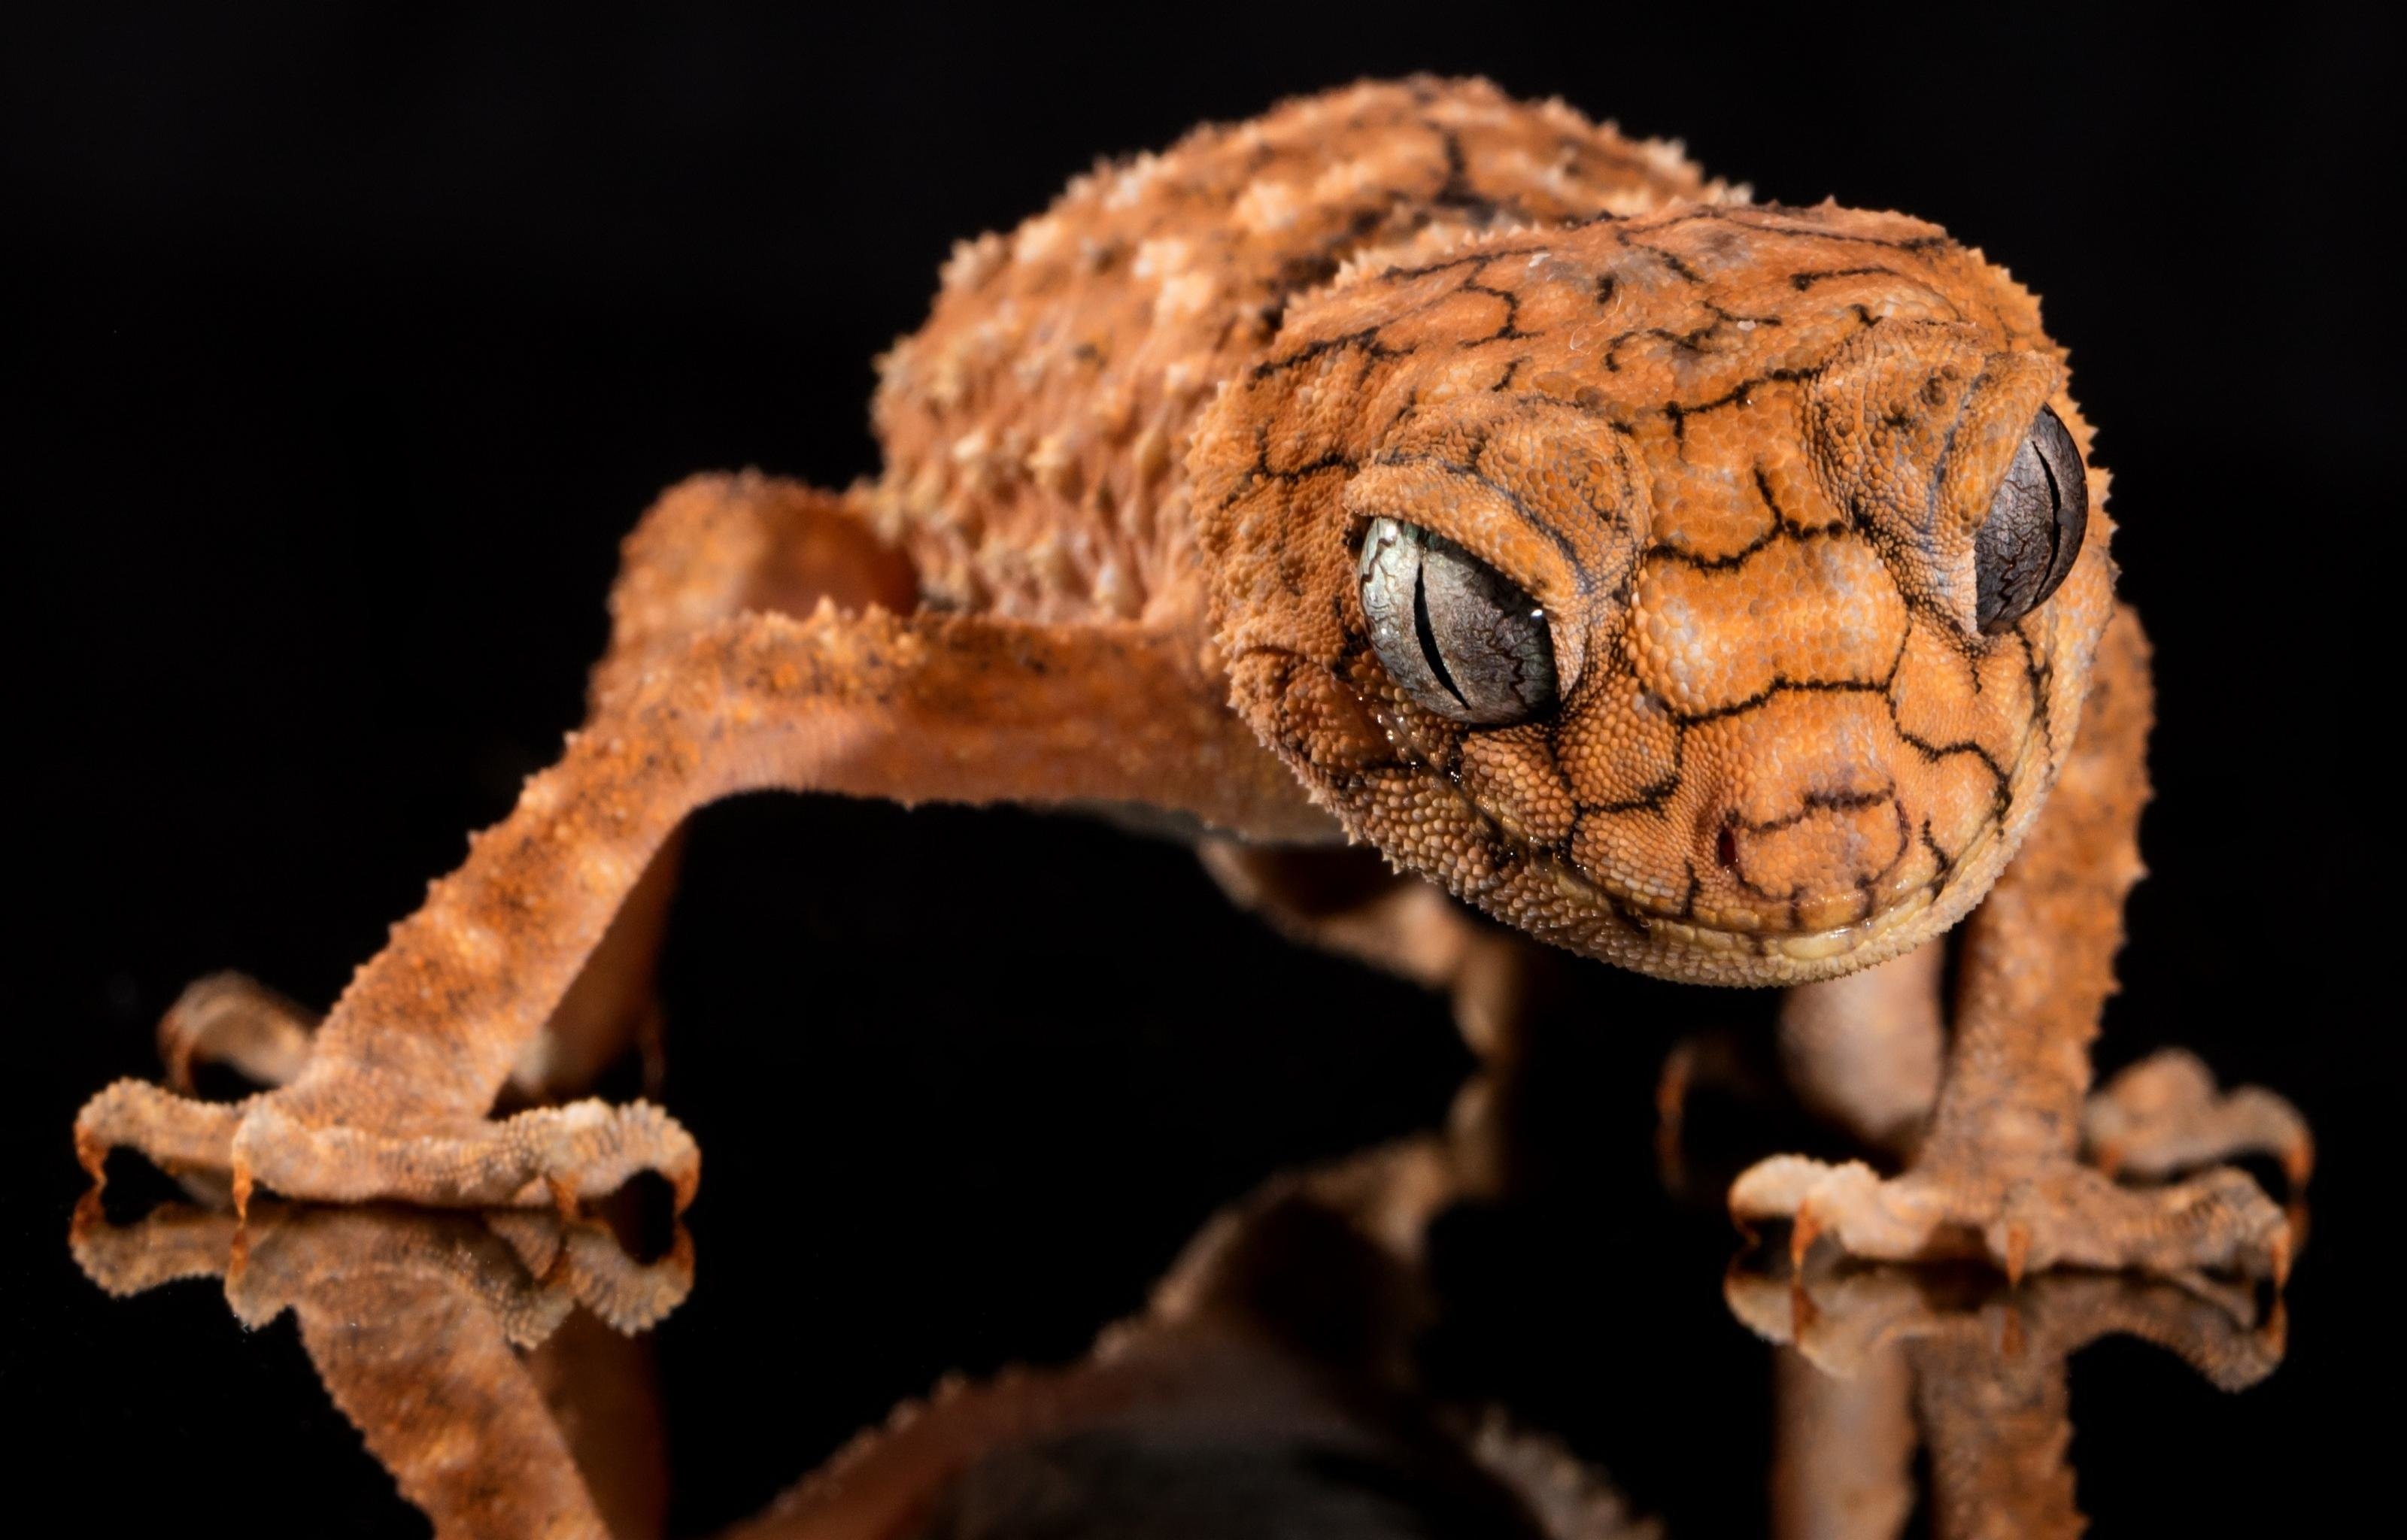 Gecko: Small, nocturnal lizards found in all the warm parts of the world. 3200x2050 HD Wallpaper.